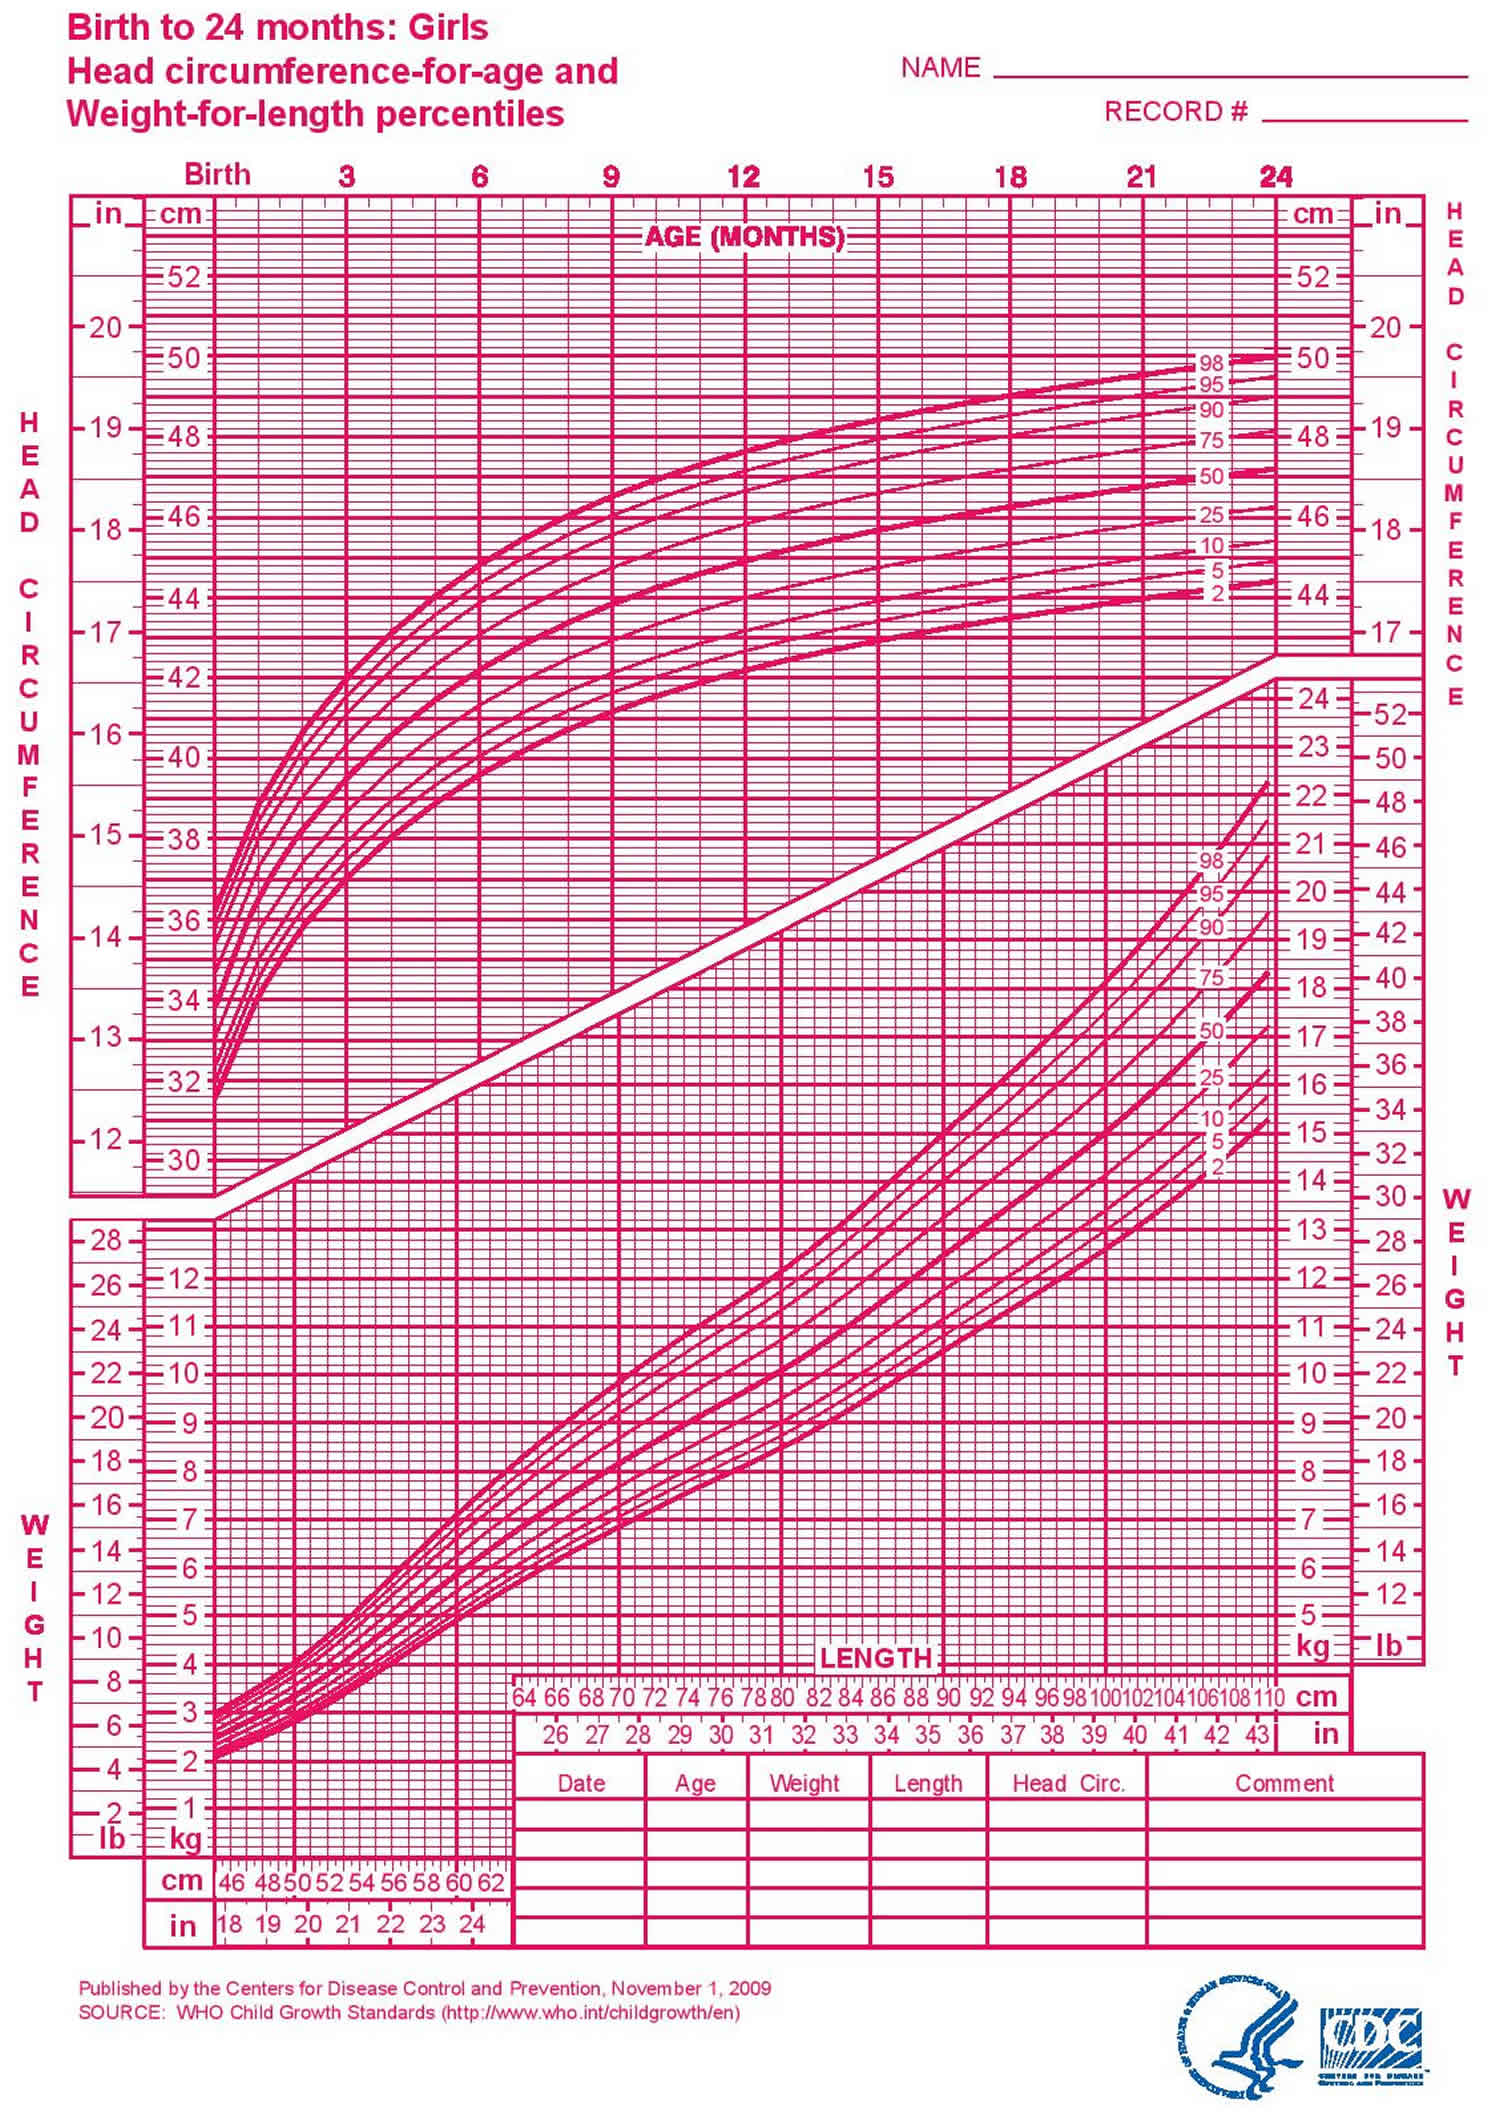 Girls-Growth-Chart-Birth-to-2-Years-Head-circumference-and-weight-for-length